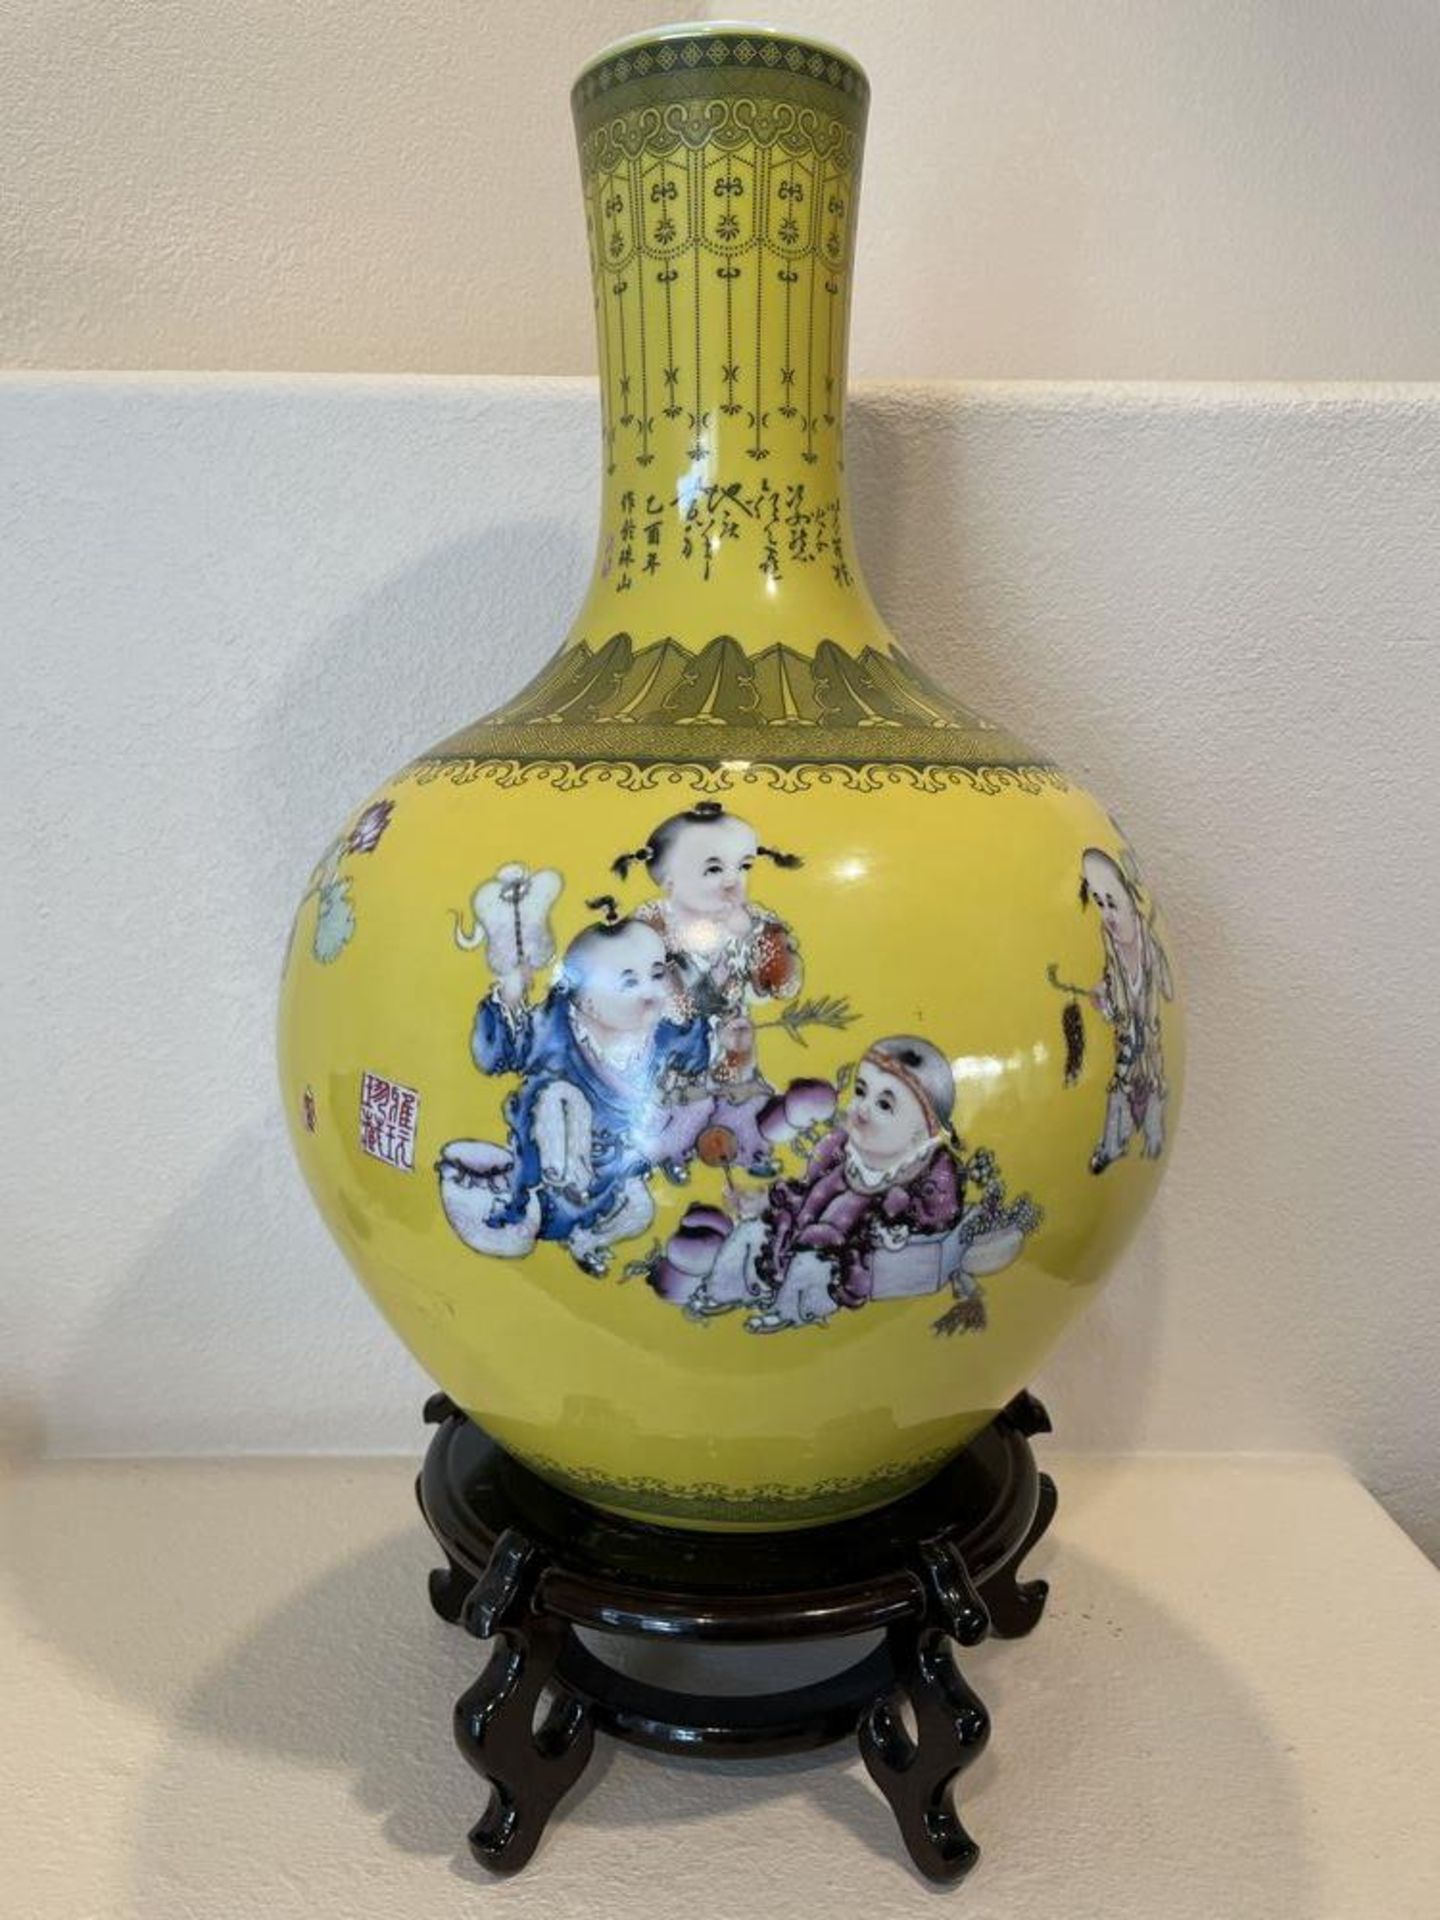 Large Antique East Asian Yellow Urn Vase Porcelin with wood stand - 27" tall x 15" wide - Image 2 of 7